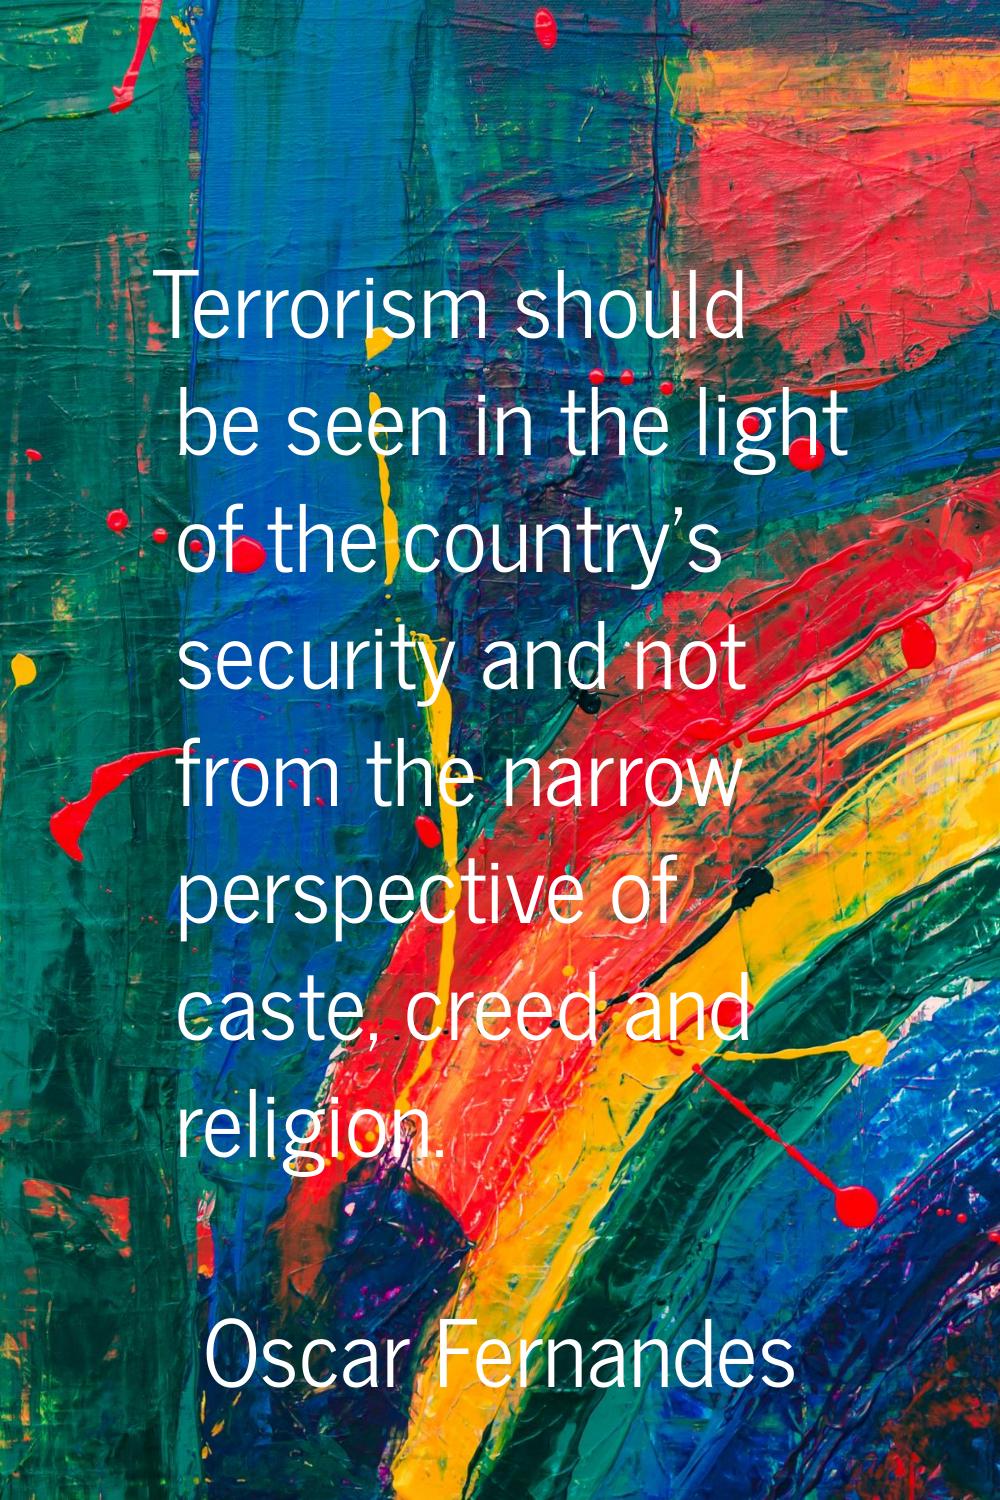 Terrorism should be seen in the light of the country's security and not from the narrow perspective